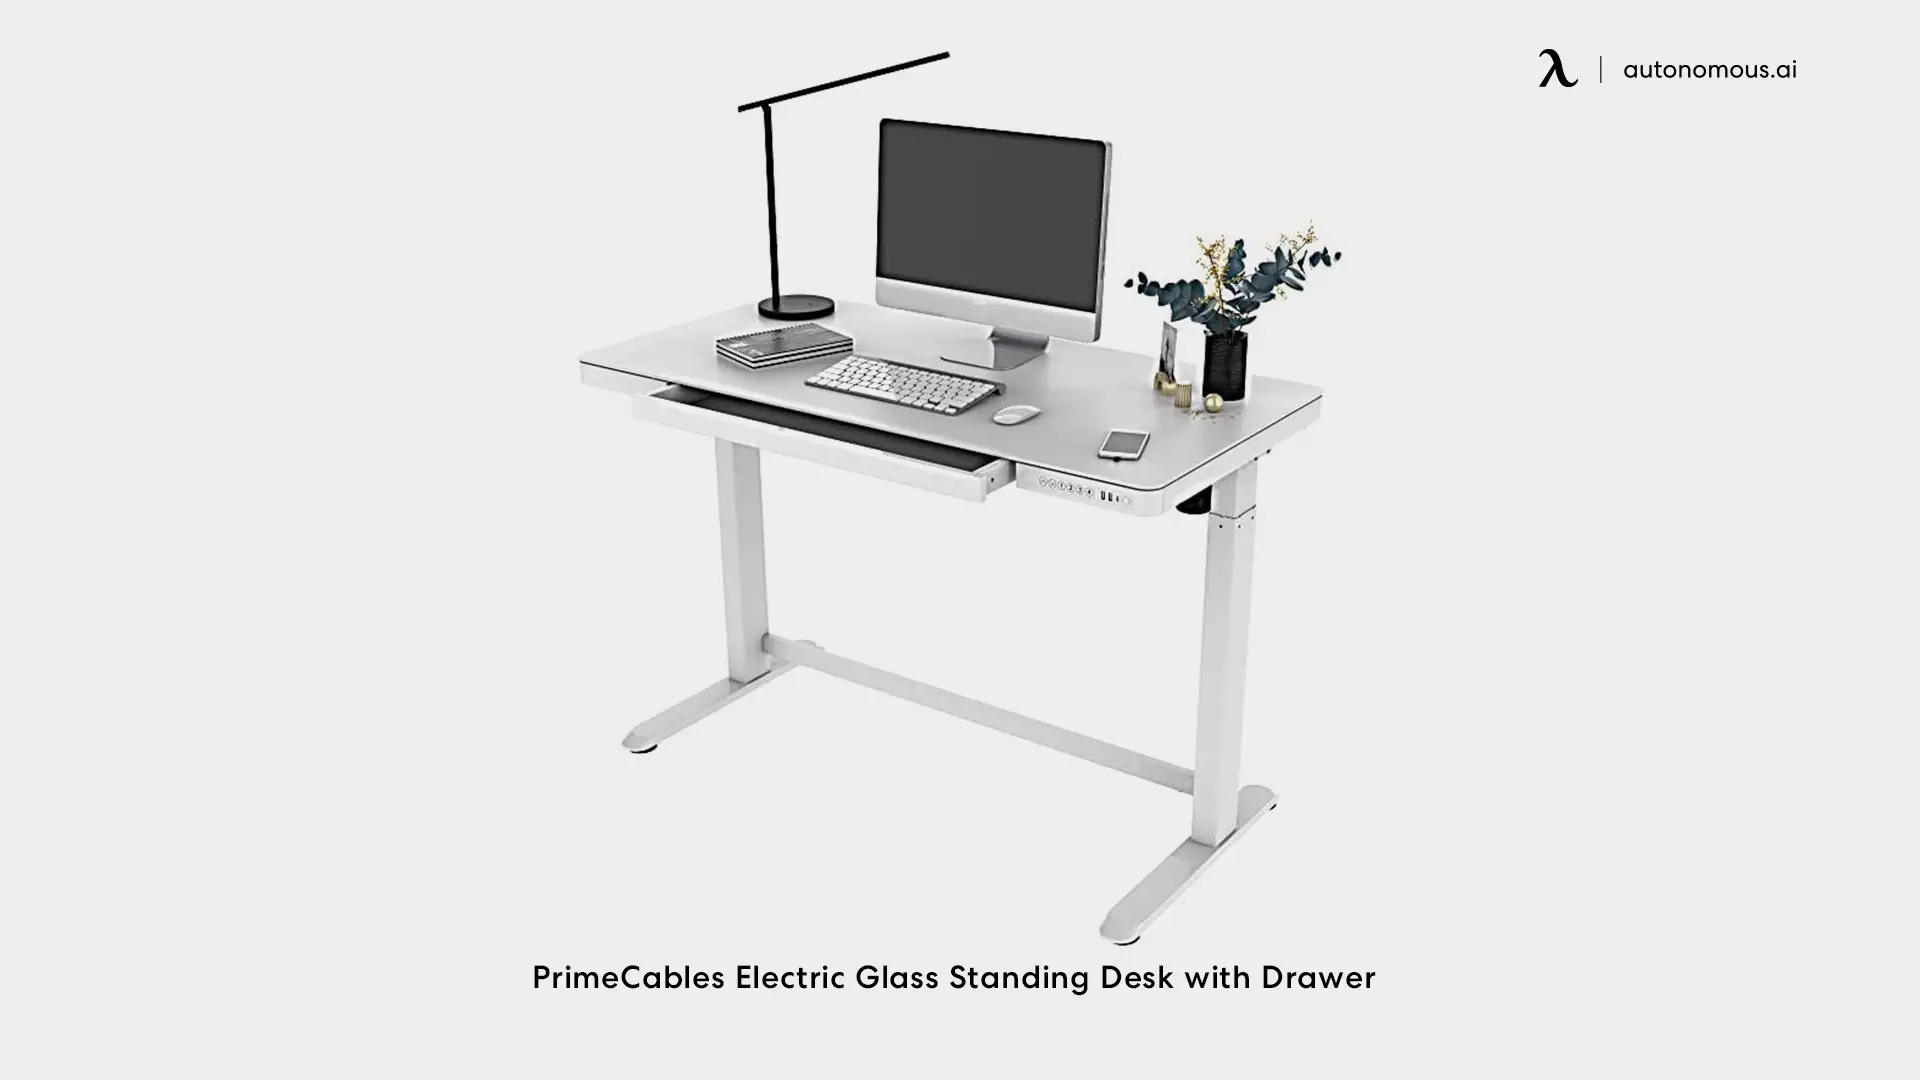 PrimeCables Electric Glass Standing Desk with Drawer